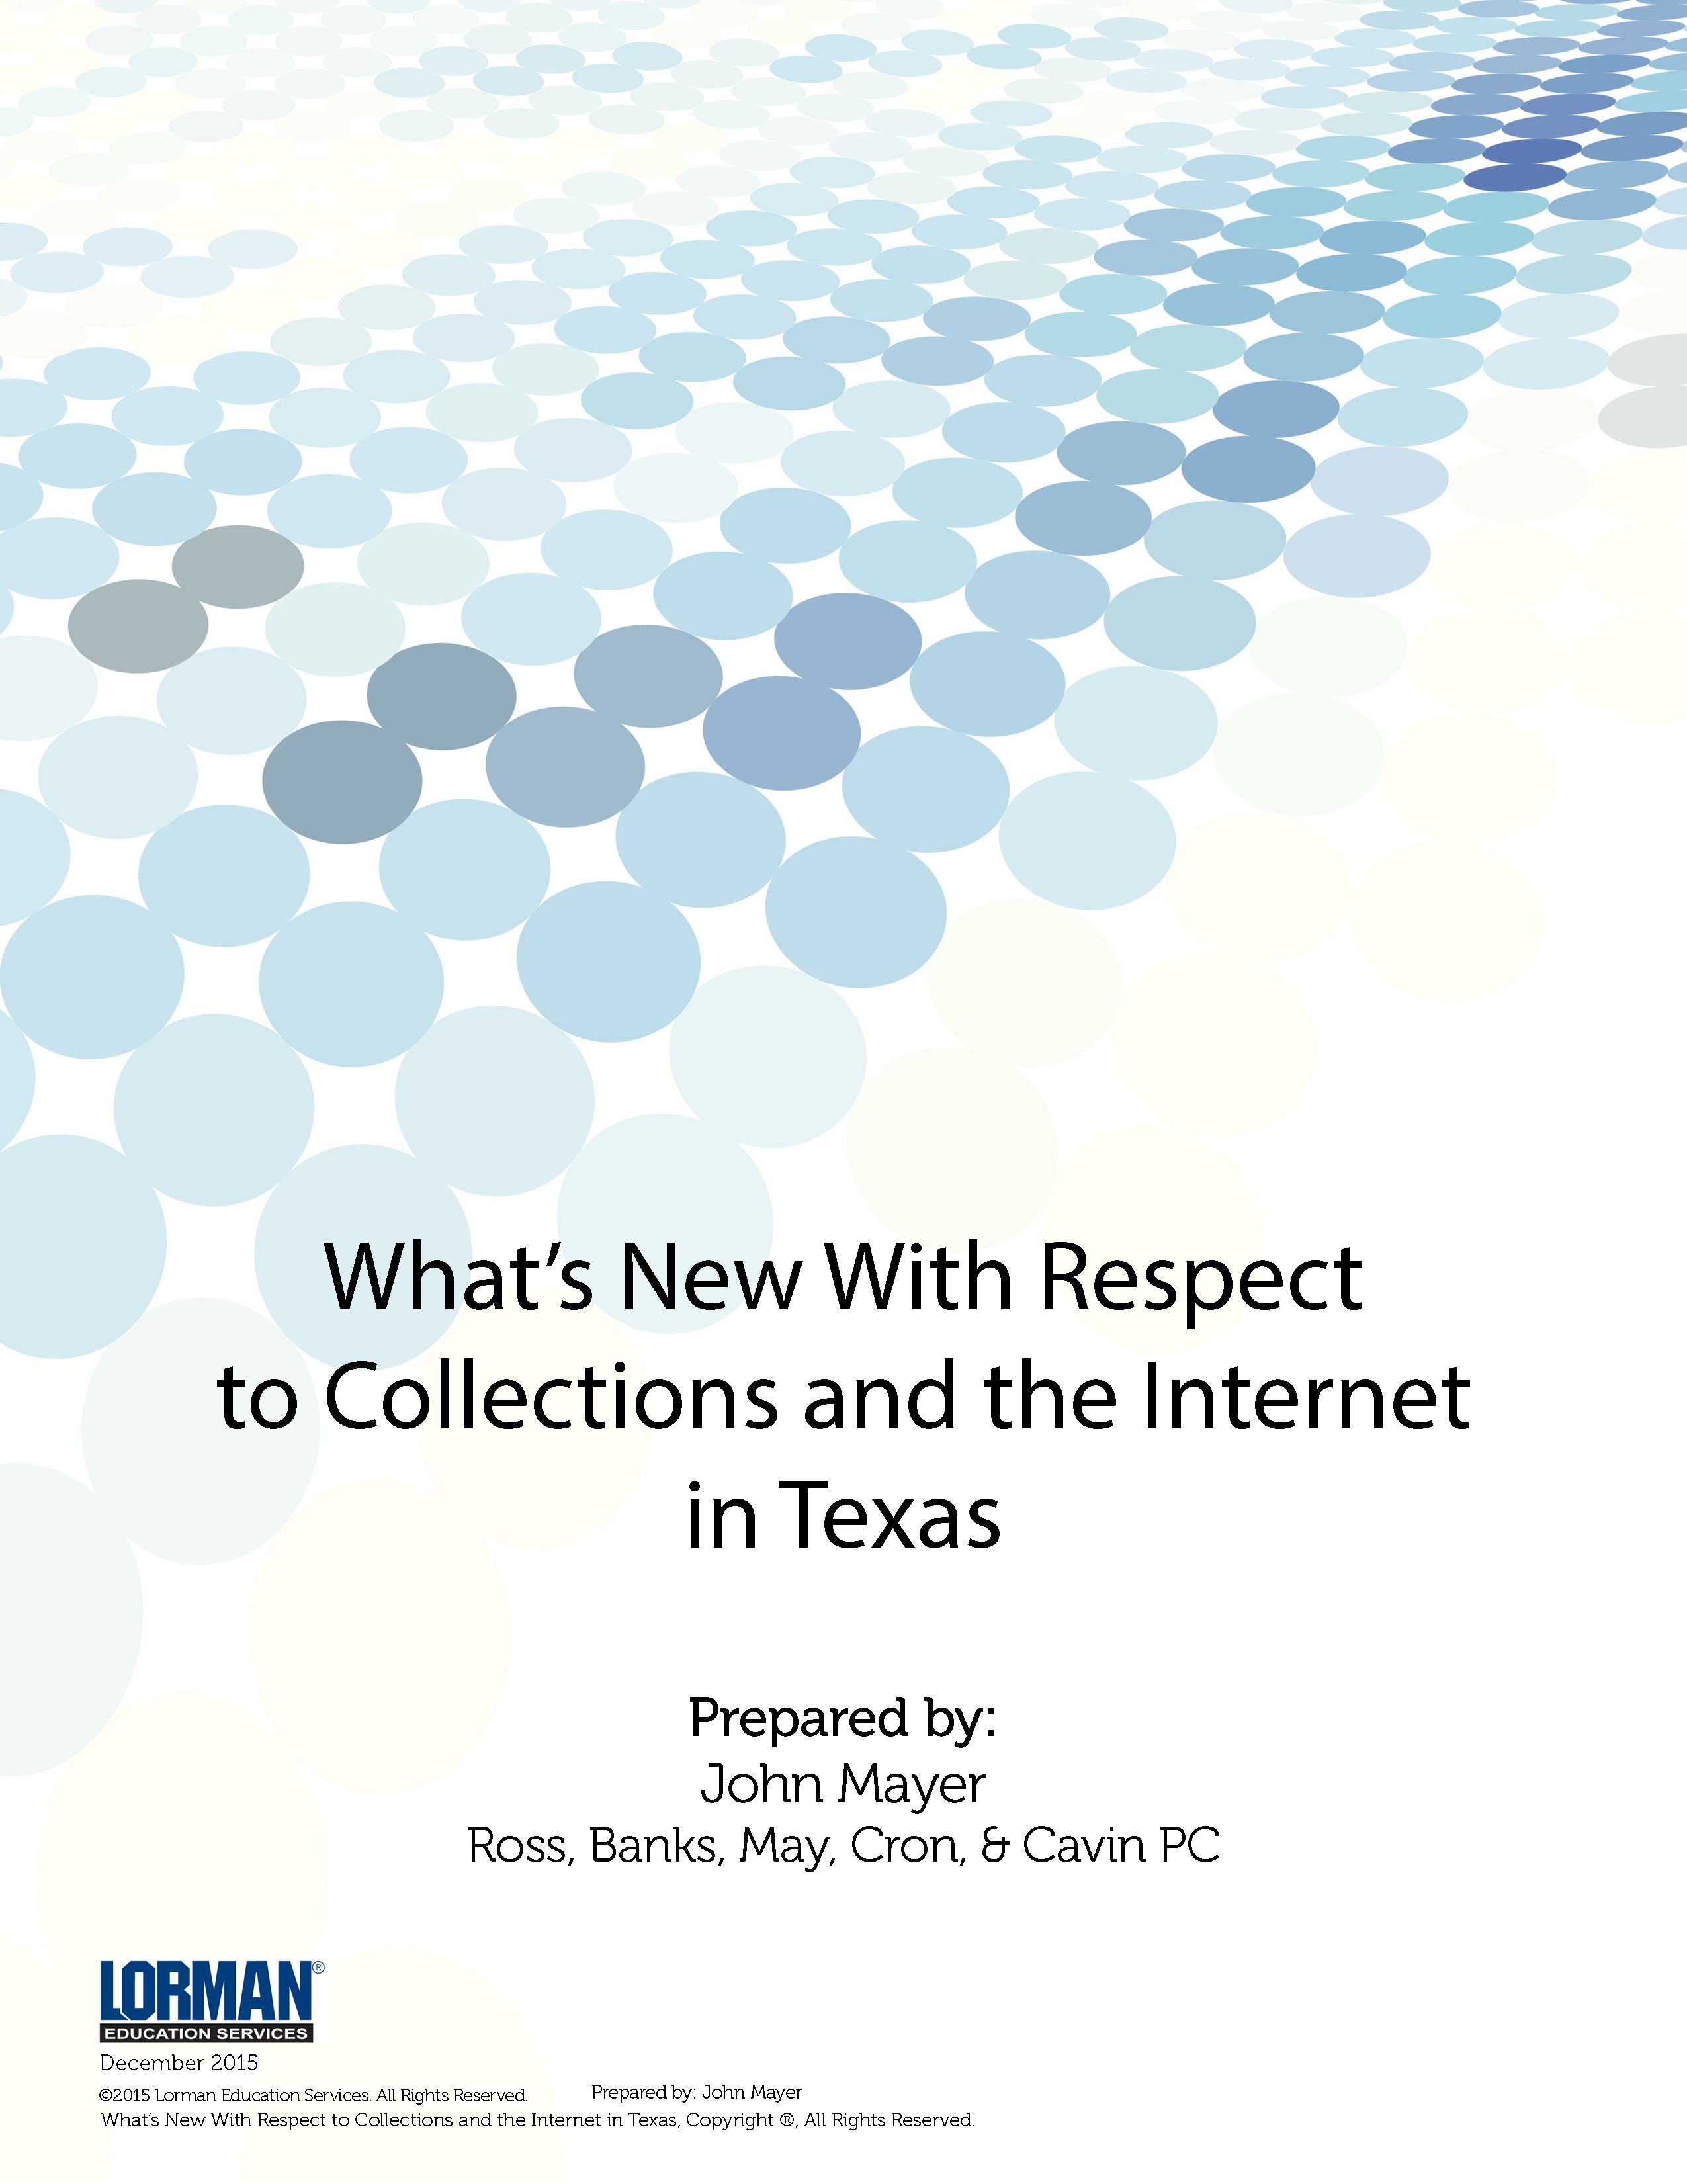 What's New With Respect to Collections and the Internet in Texas